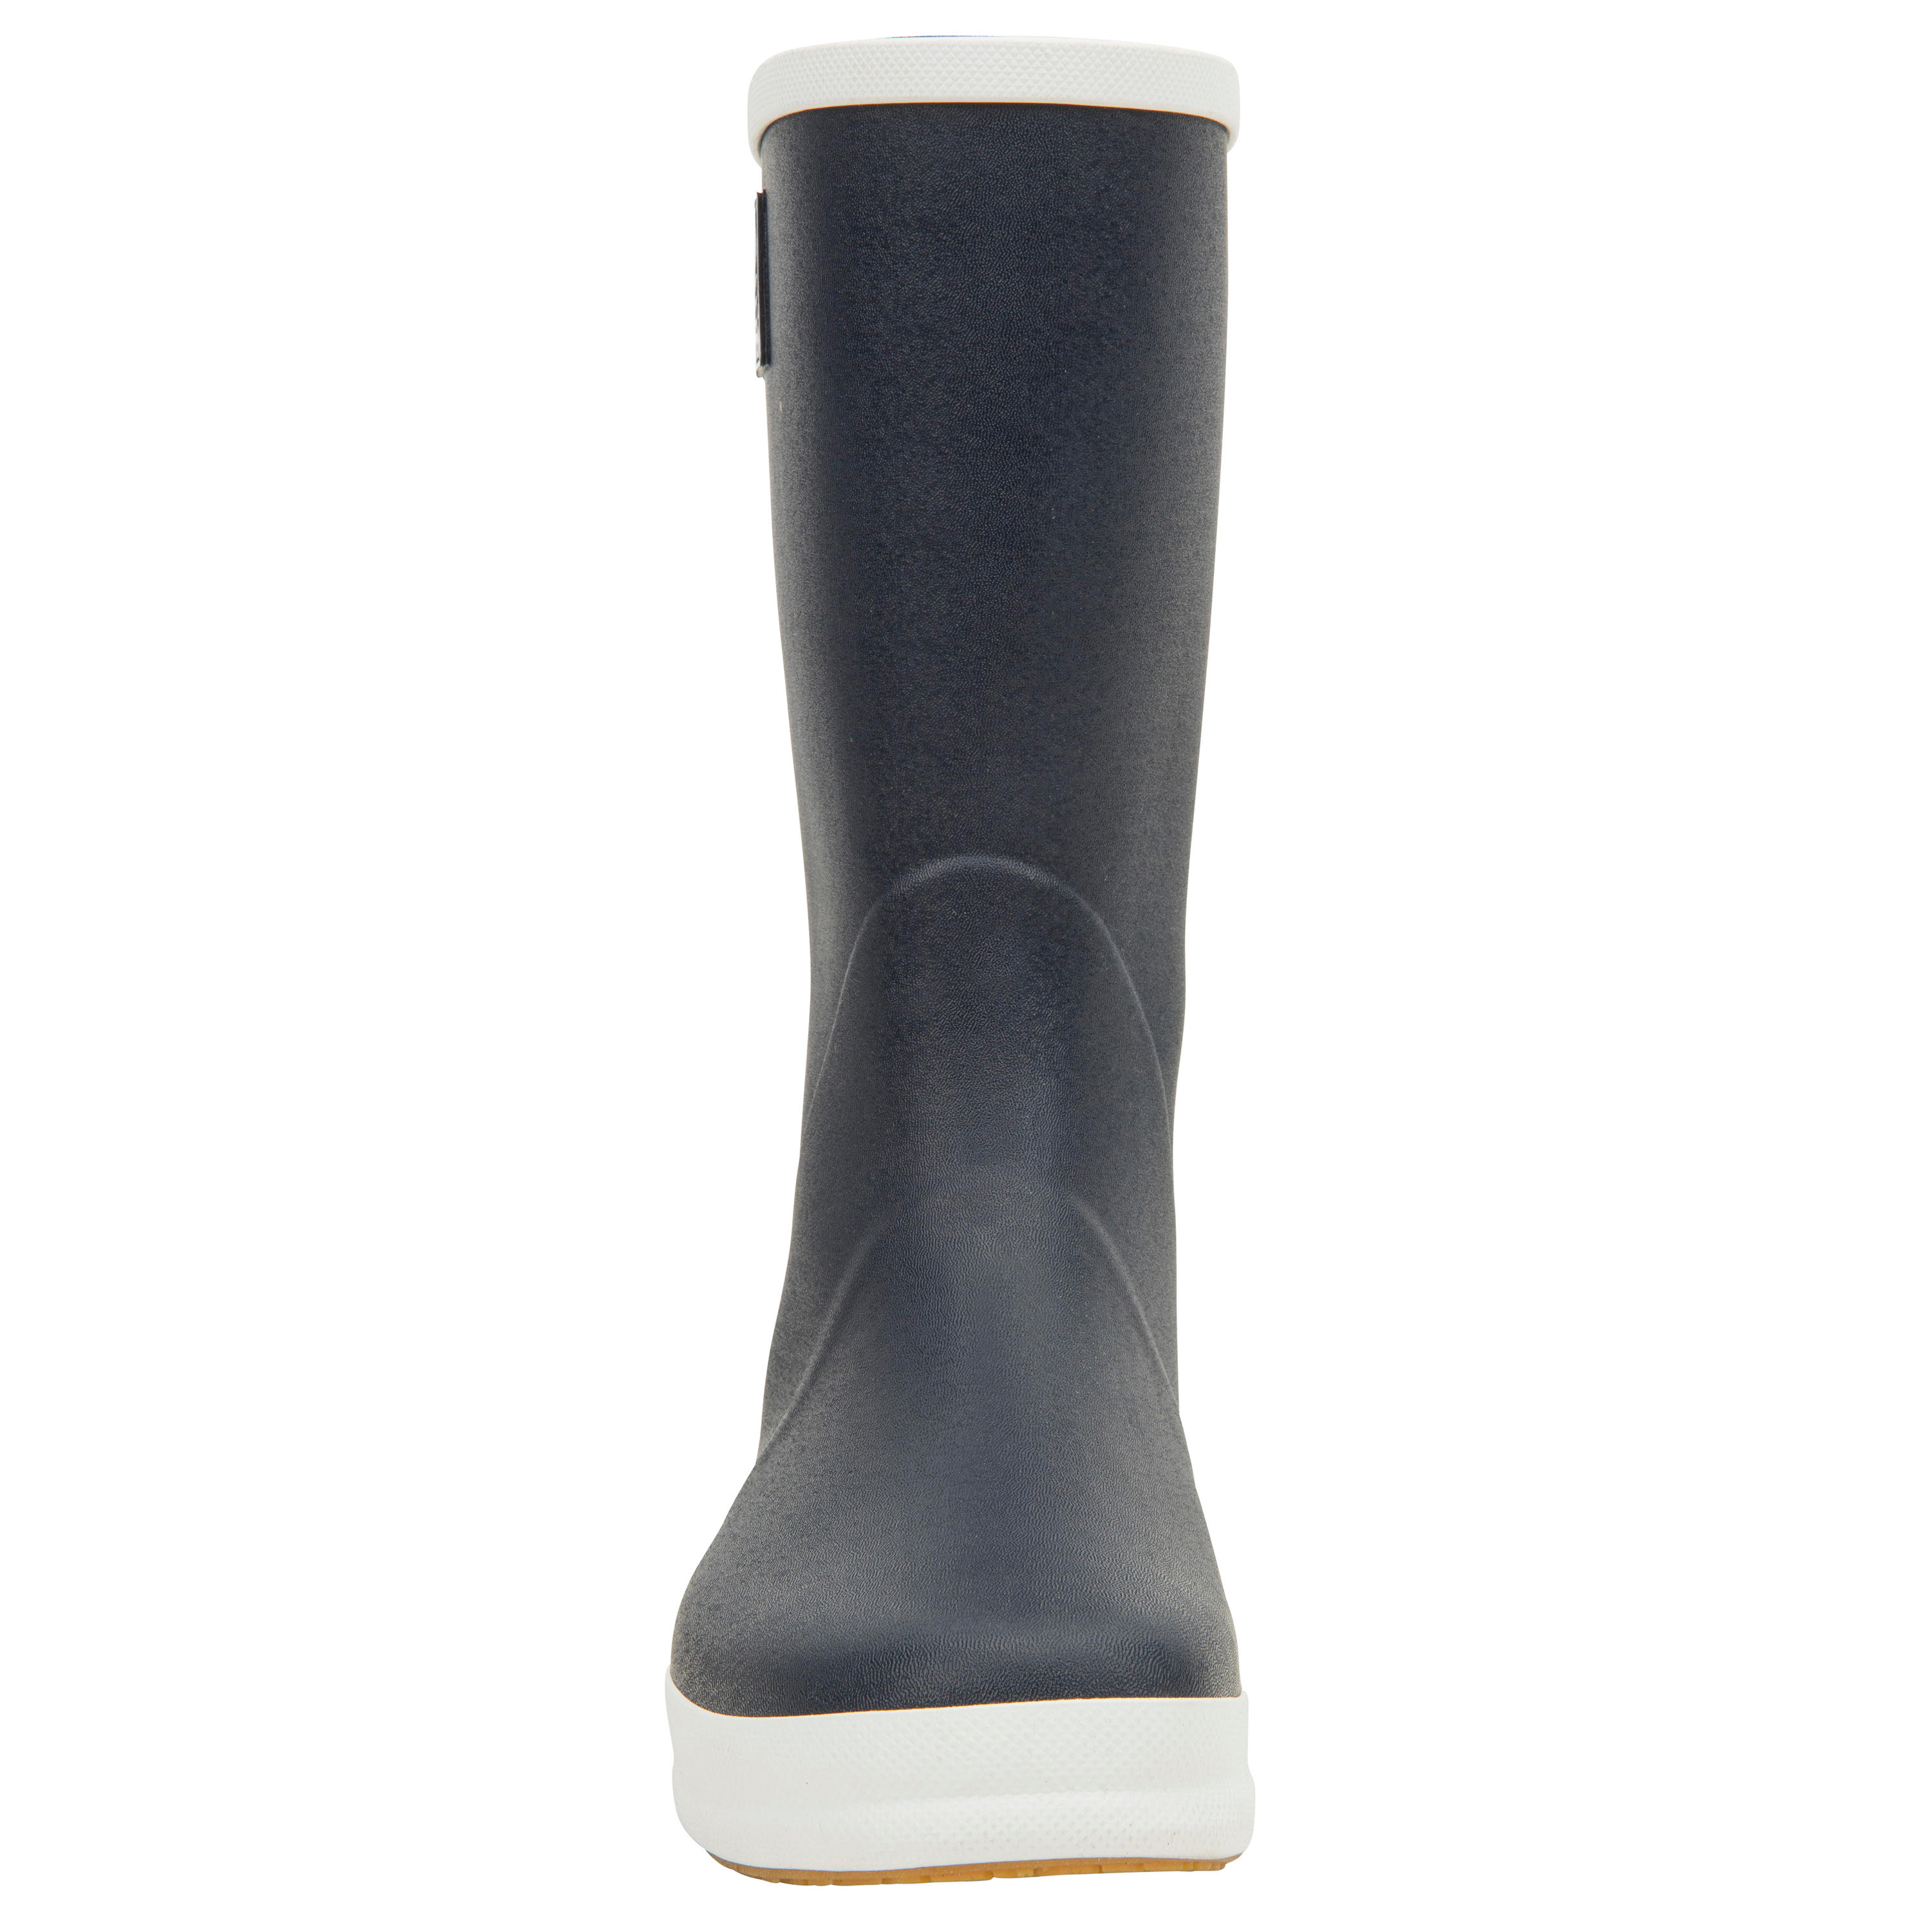 Sailing boots, rubber rain boots - 500 Adults' Navy 8/11